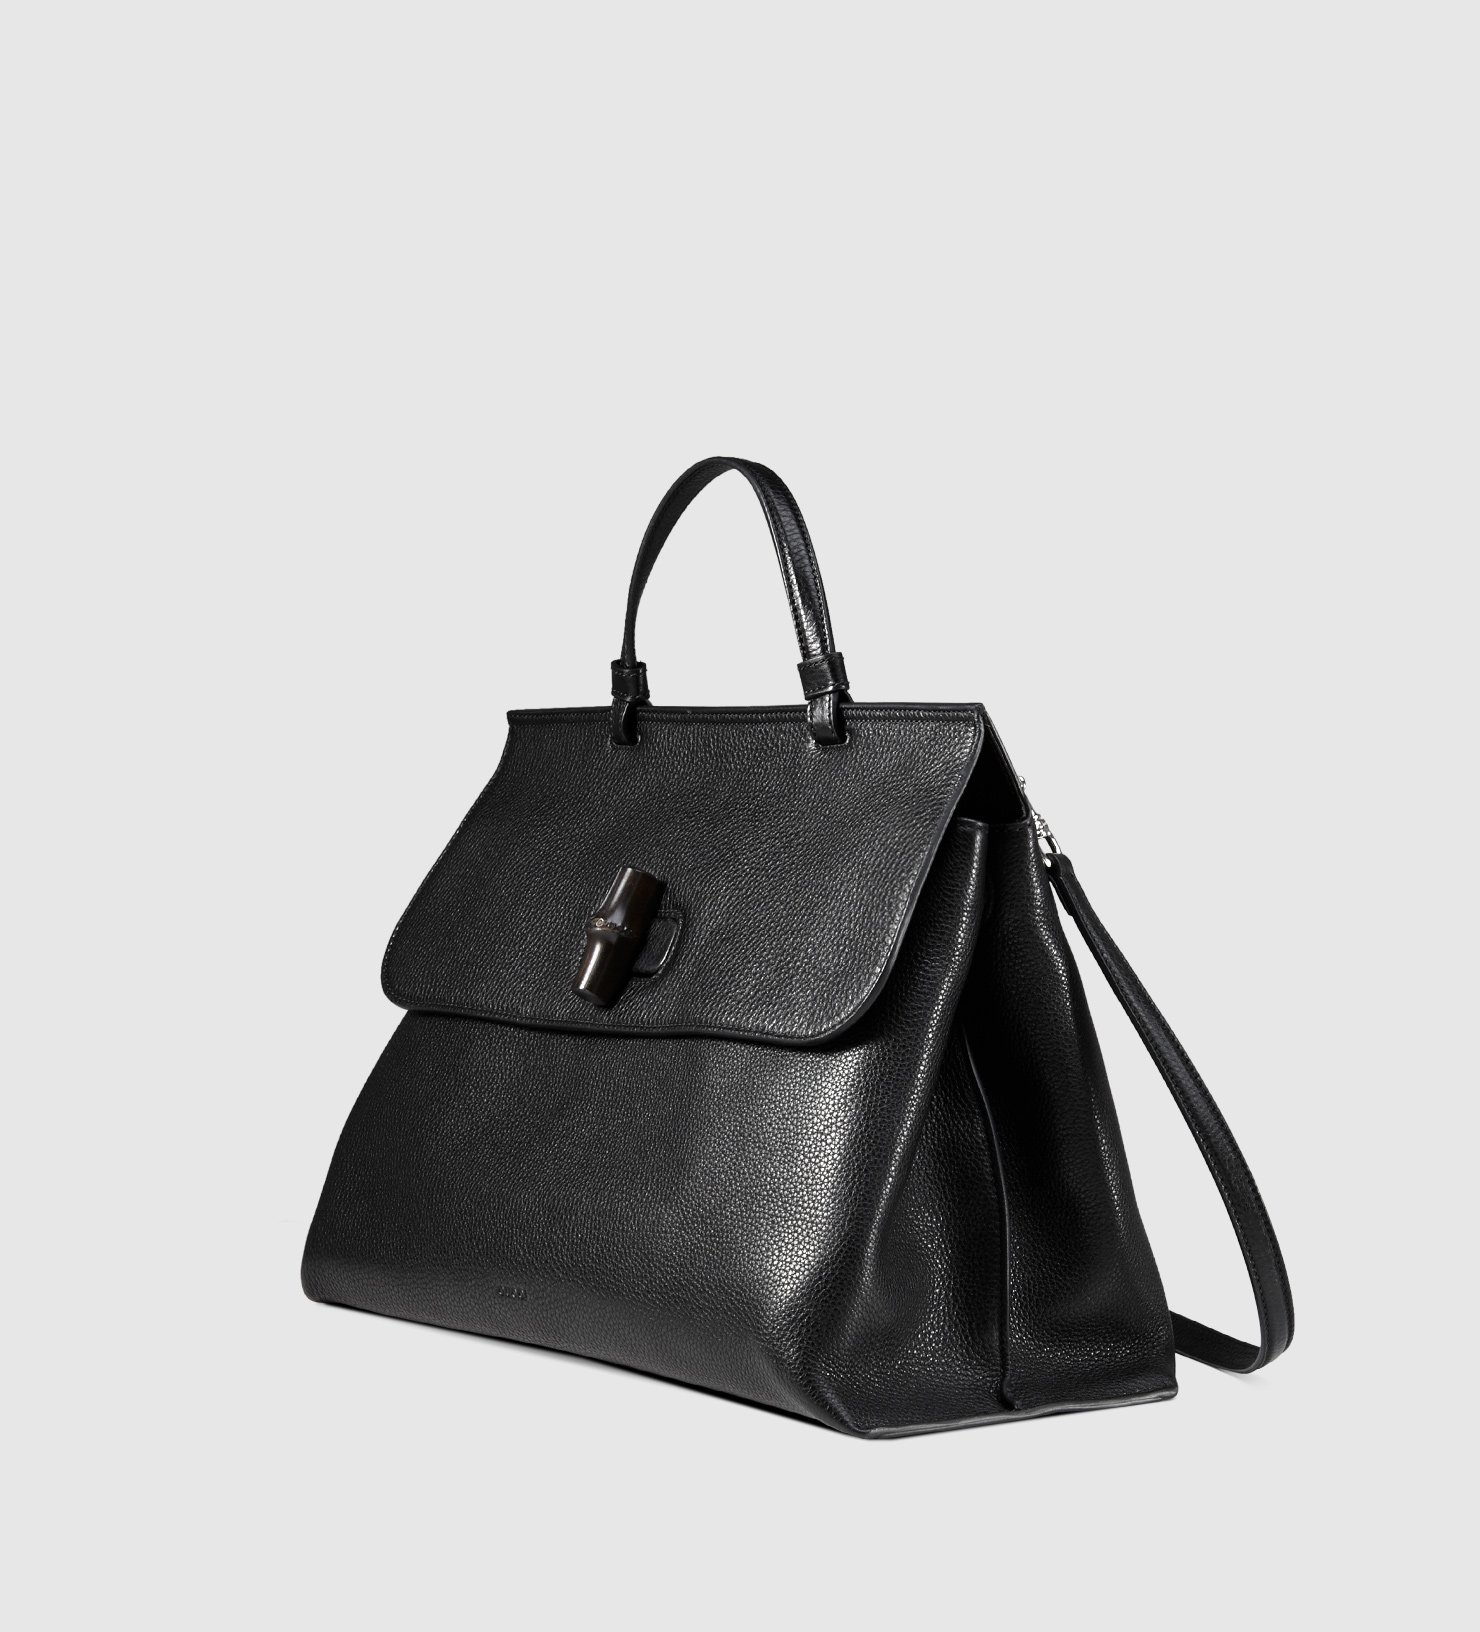 Gucci Bamboo Daily Leather Top Handle Bag in Black - Lyst